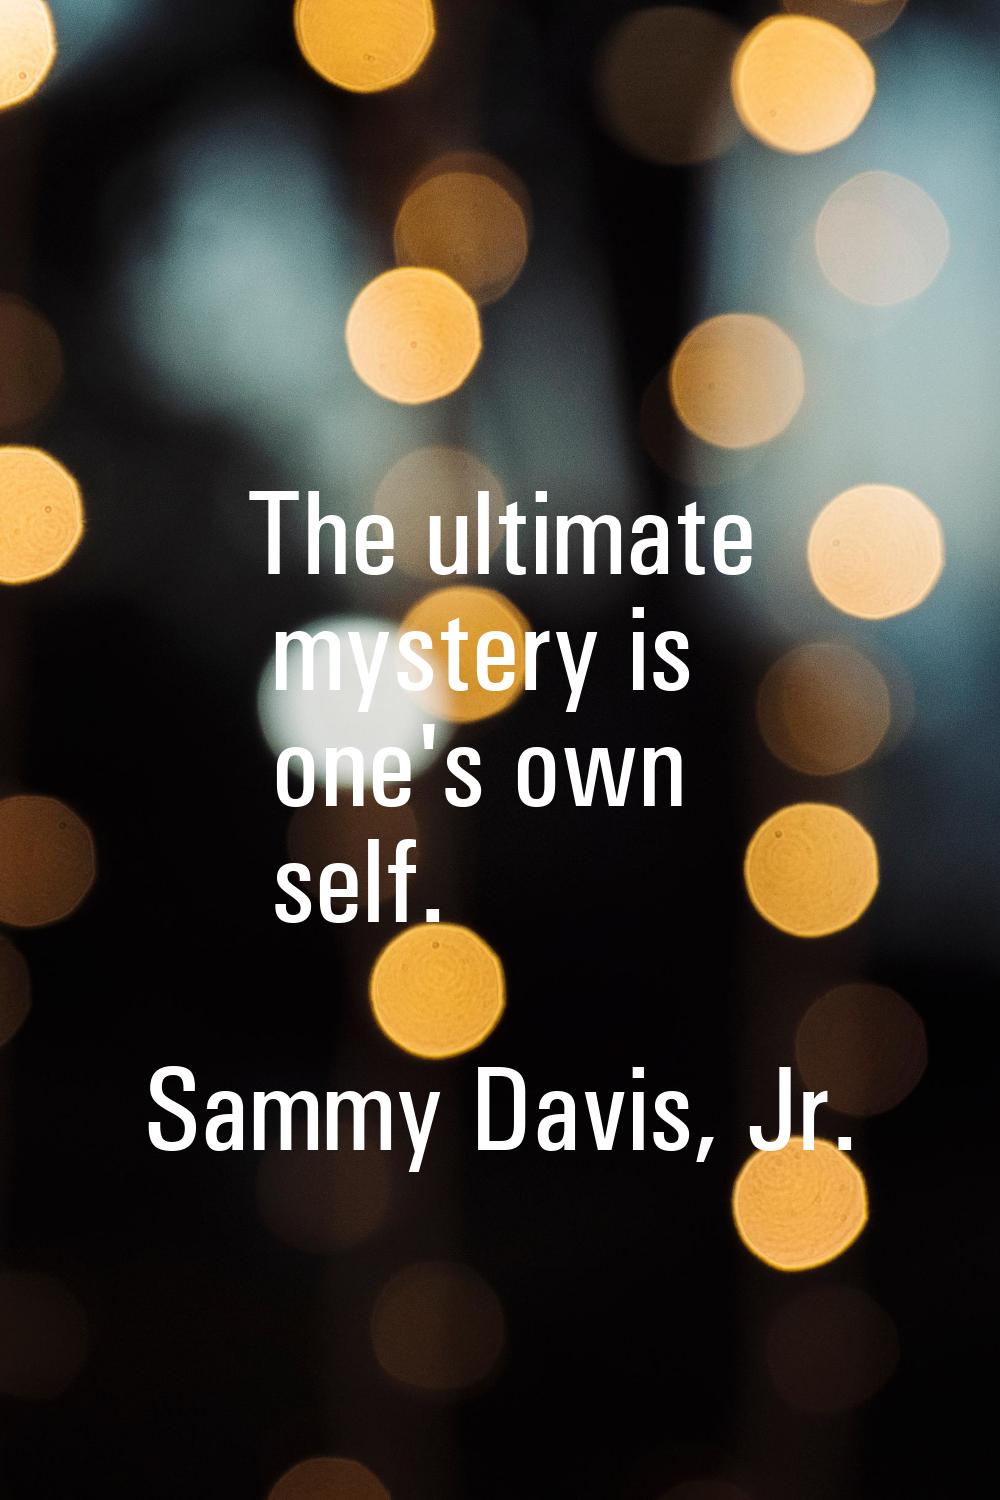 The ultimate mystery is one's own self.